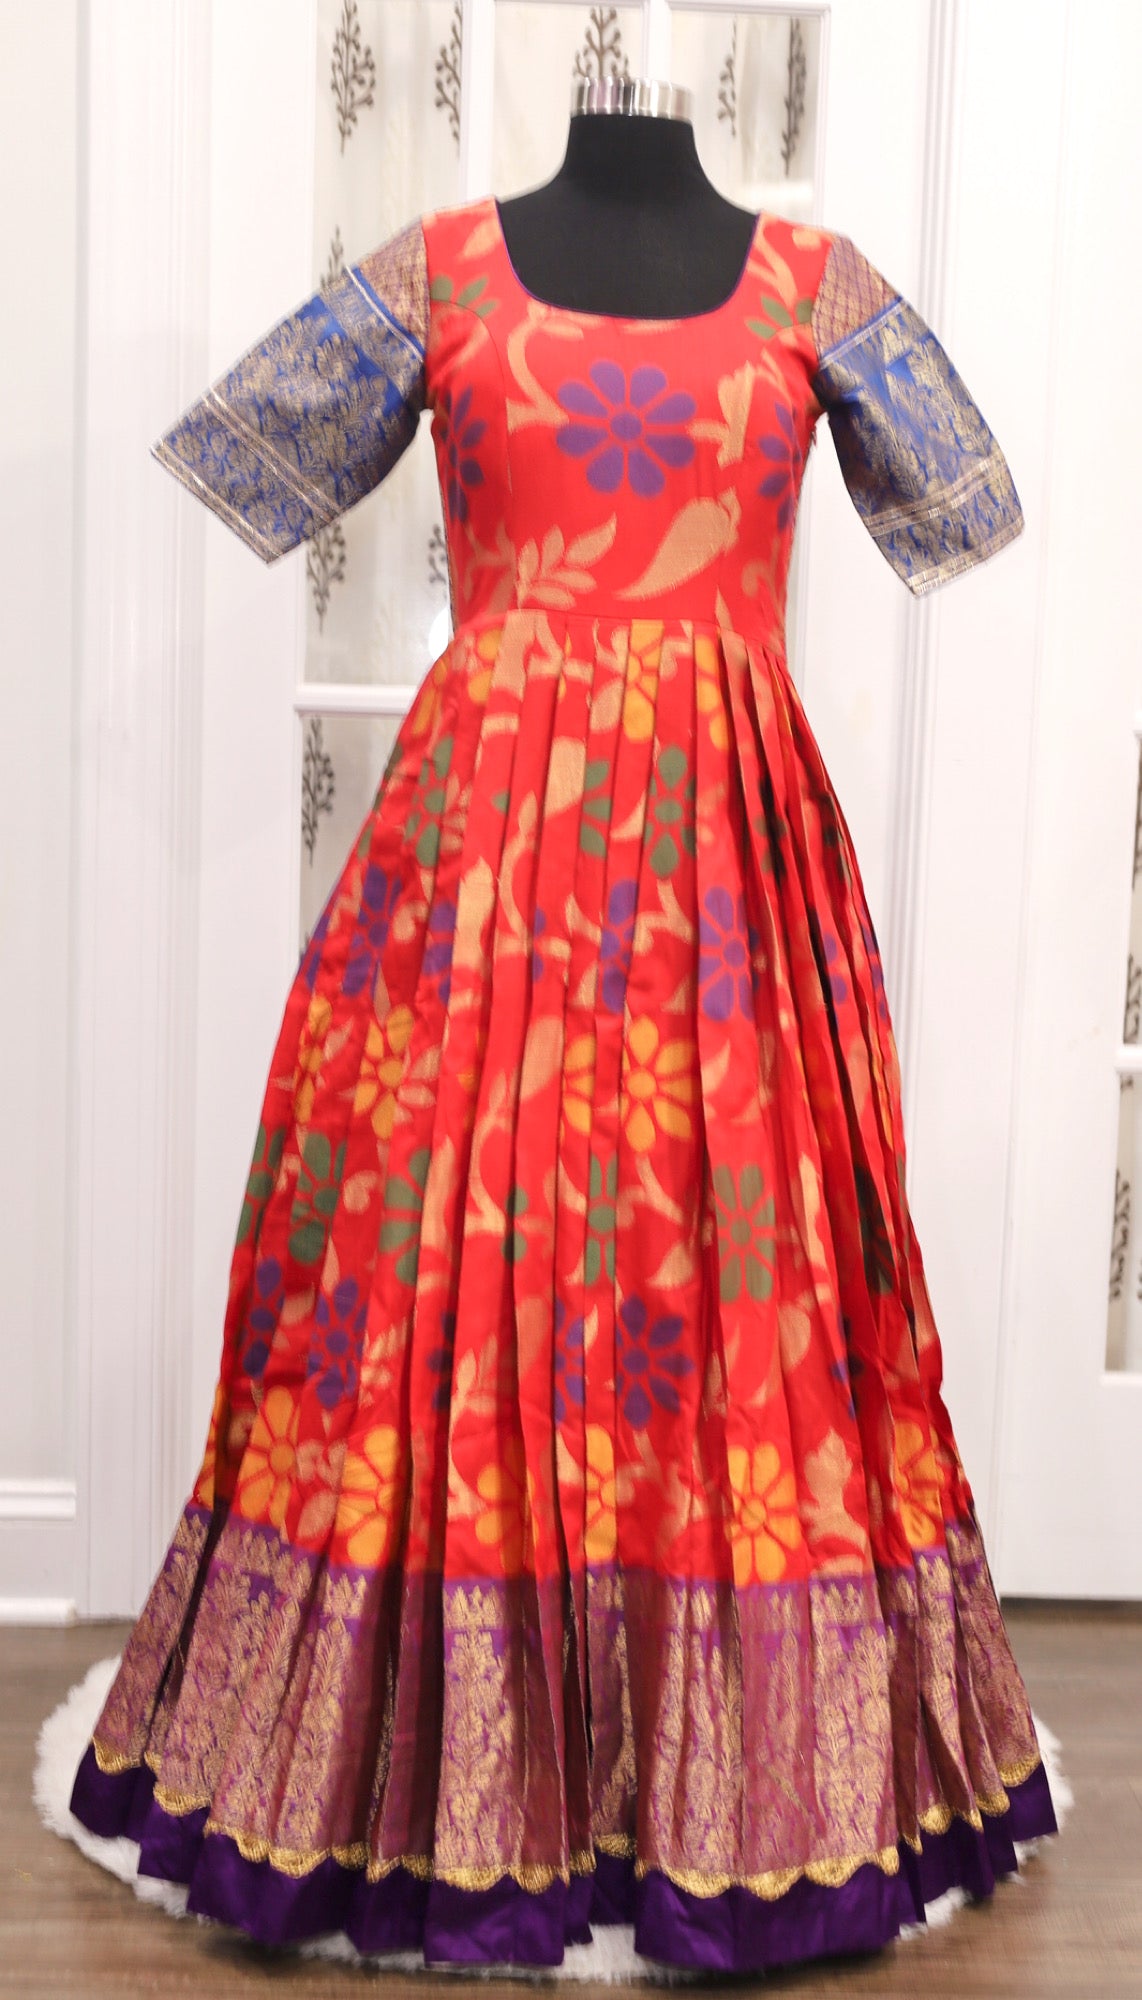 Traditional Banarasi Long gown in red color with floral pattern weave